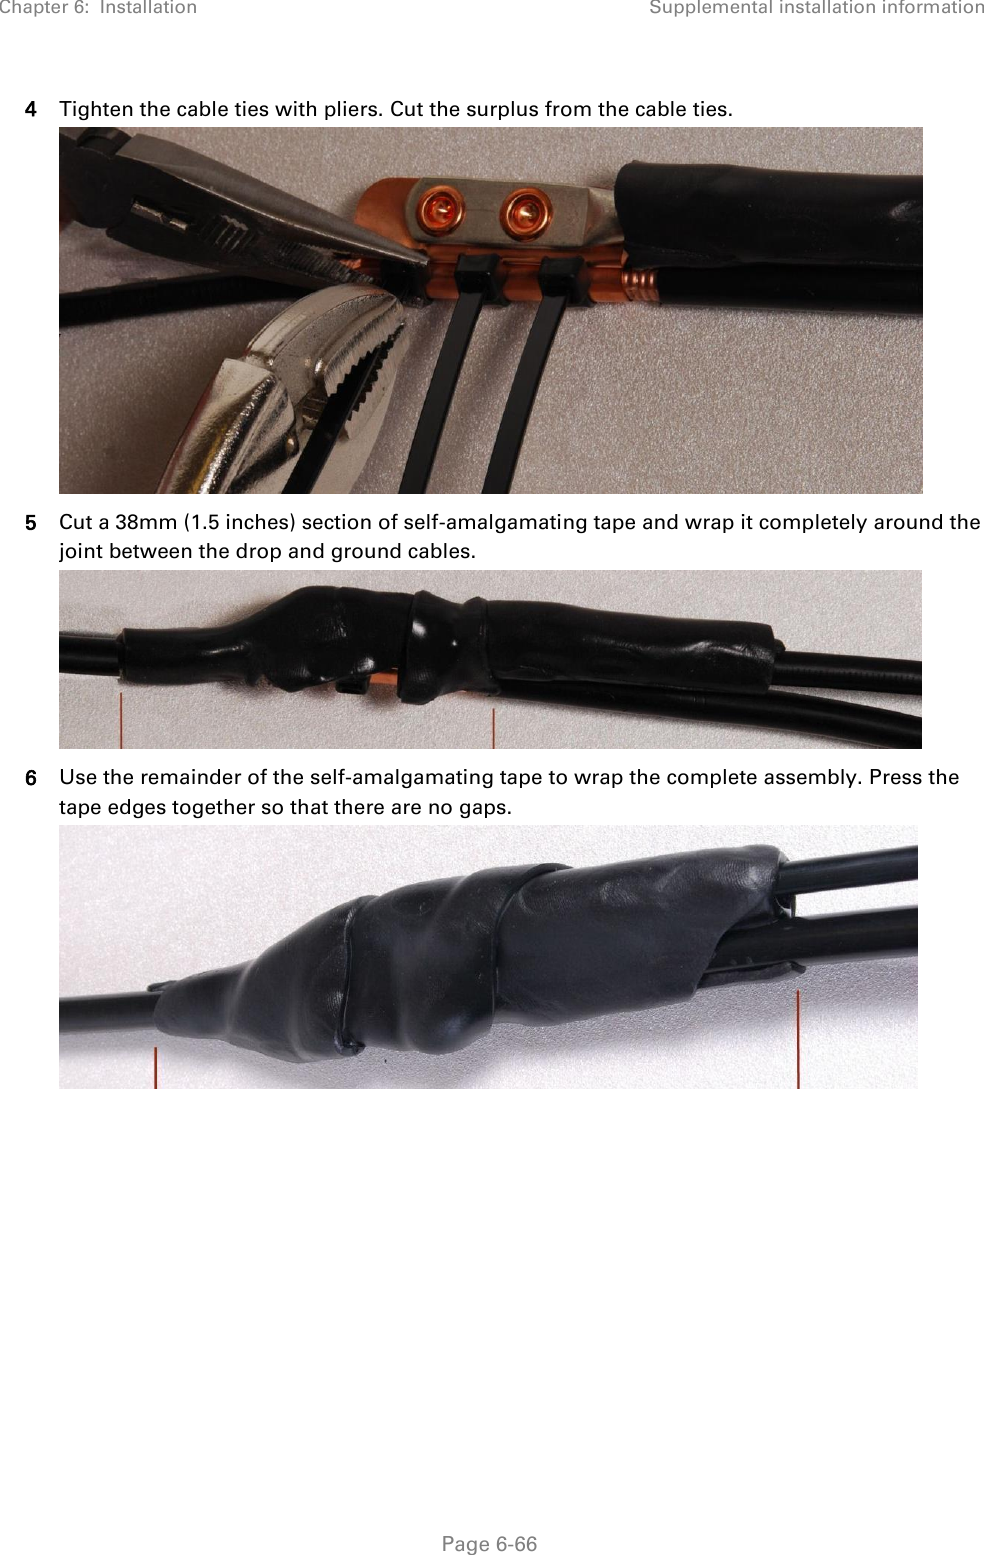 Chapter 6:  Installation Supplemental installation information   Page 6-66 4 Tighten the cable ties with pliers. Cut the surplus from the cable ties.  5 Cut a 38mm (1.5 inches) section of self-amalgamating tape and wrap it completely around the joint between the drop and ground cables.  6 Use the remainder of the self-amalgamating tape to wrap the complete assembly. Press the tape edges together so that there are no gaps.  